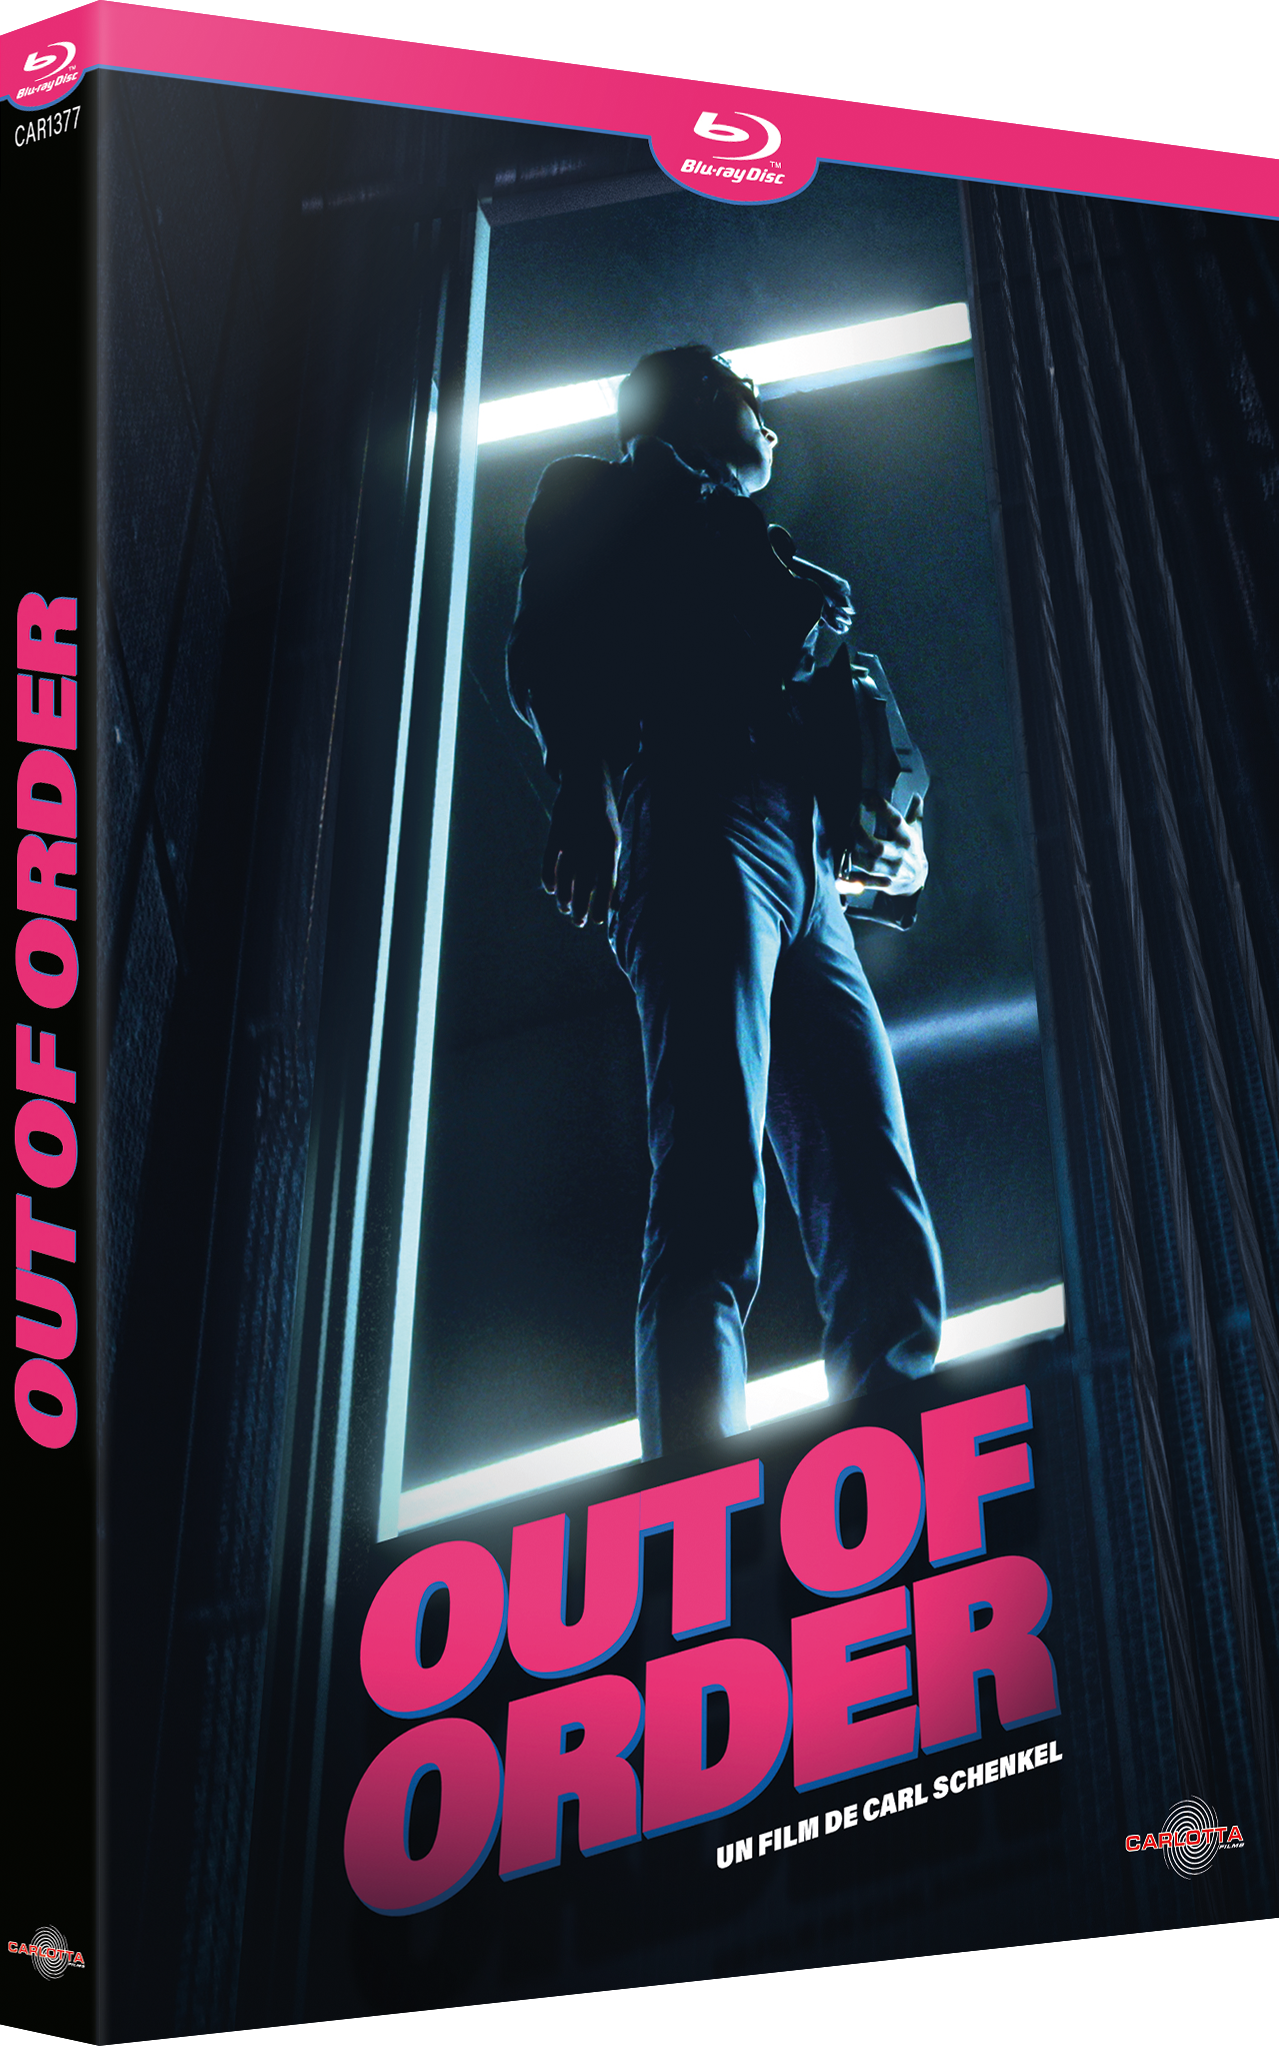 Out of order by Carl Schenkel